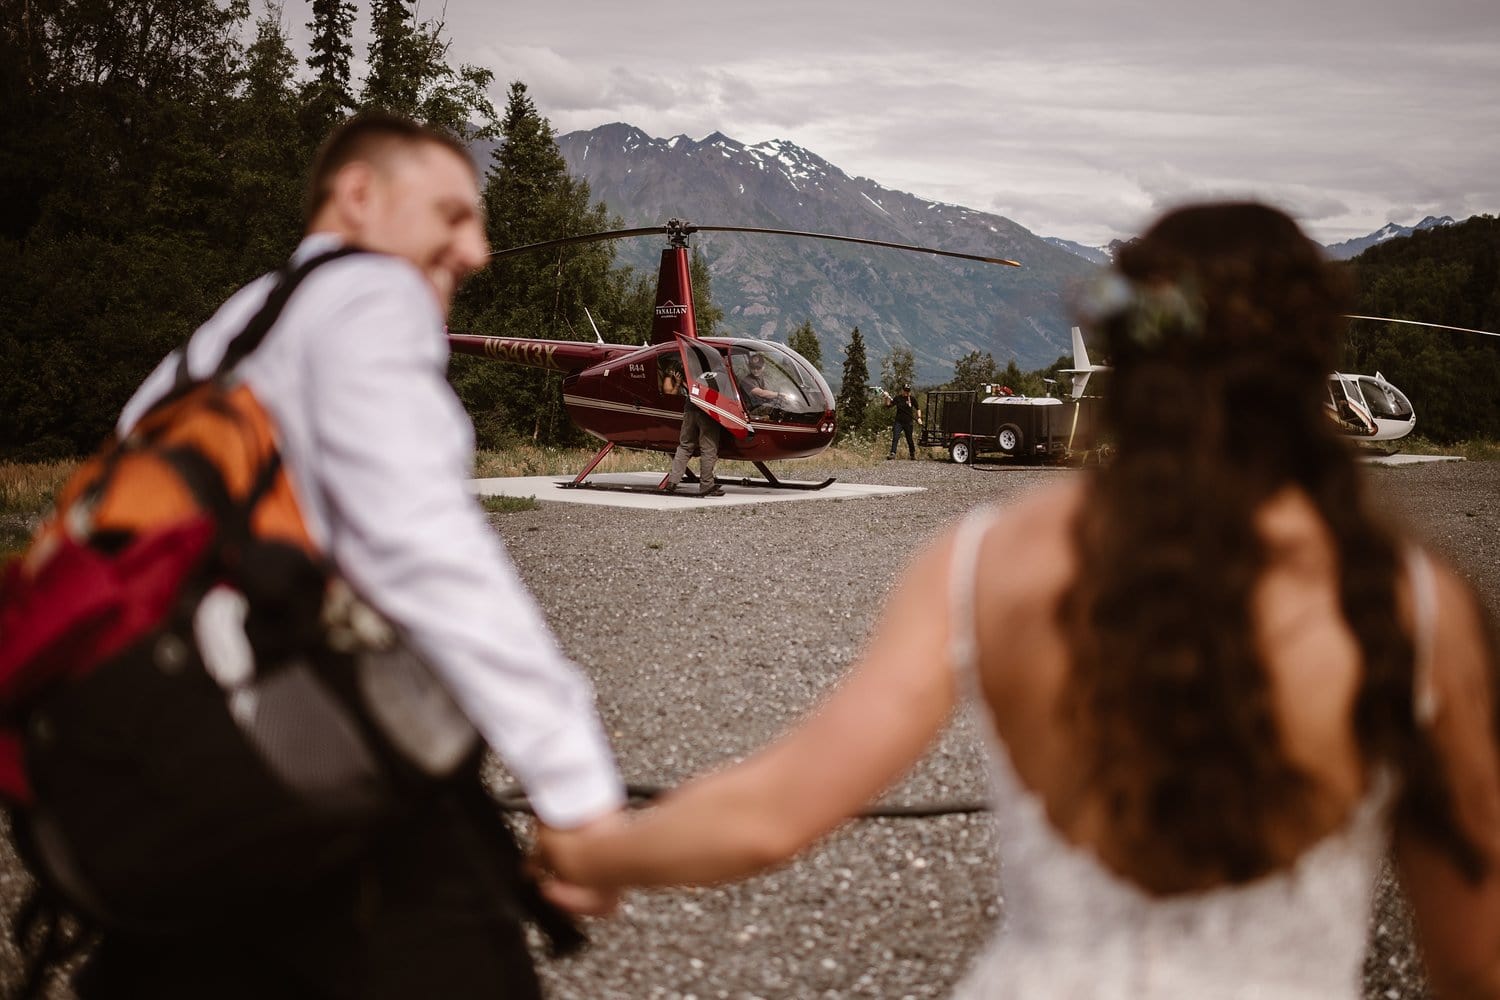 Bride and groom hold hands and walk towards helicopter.